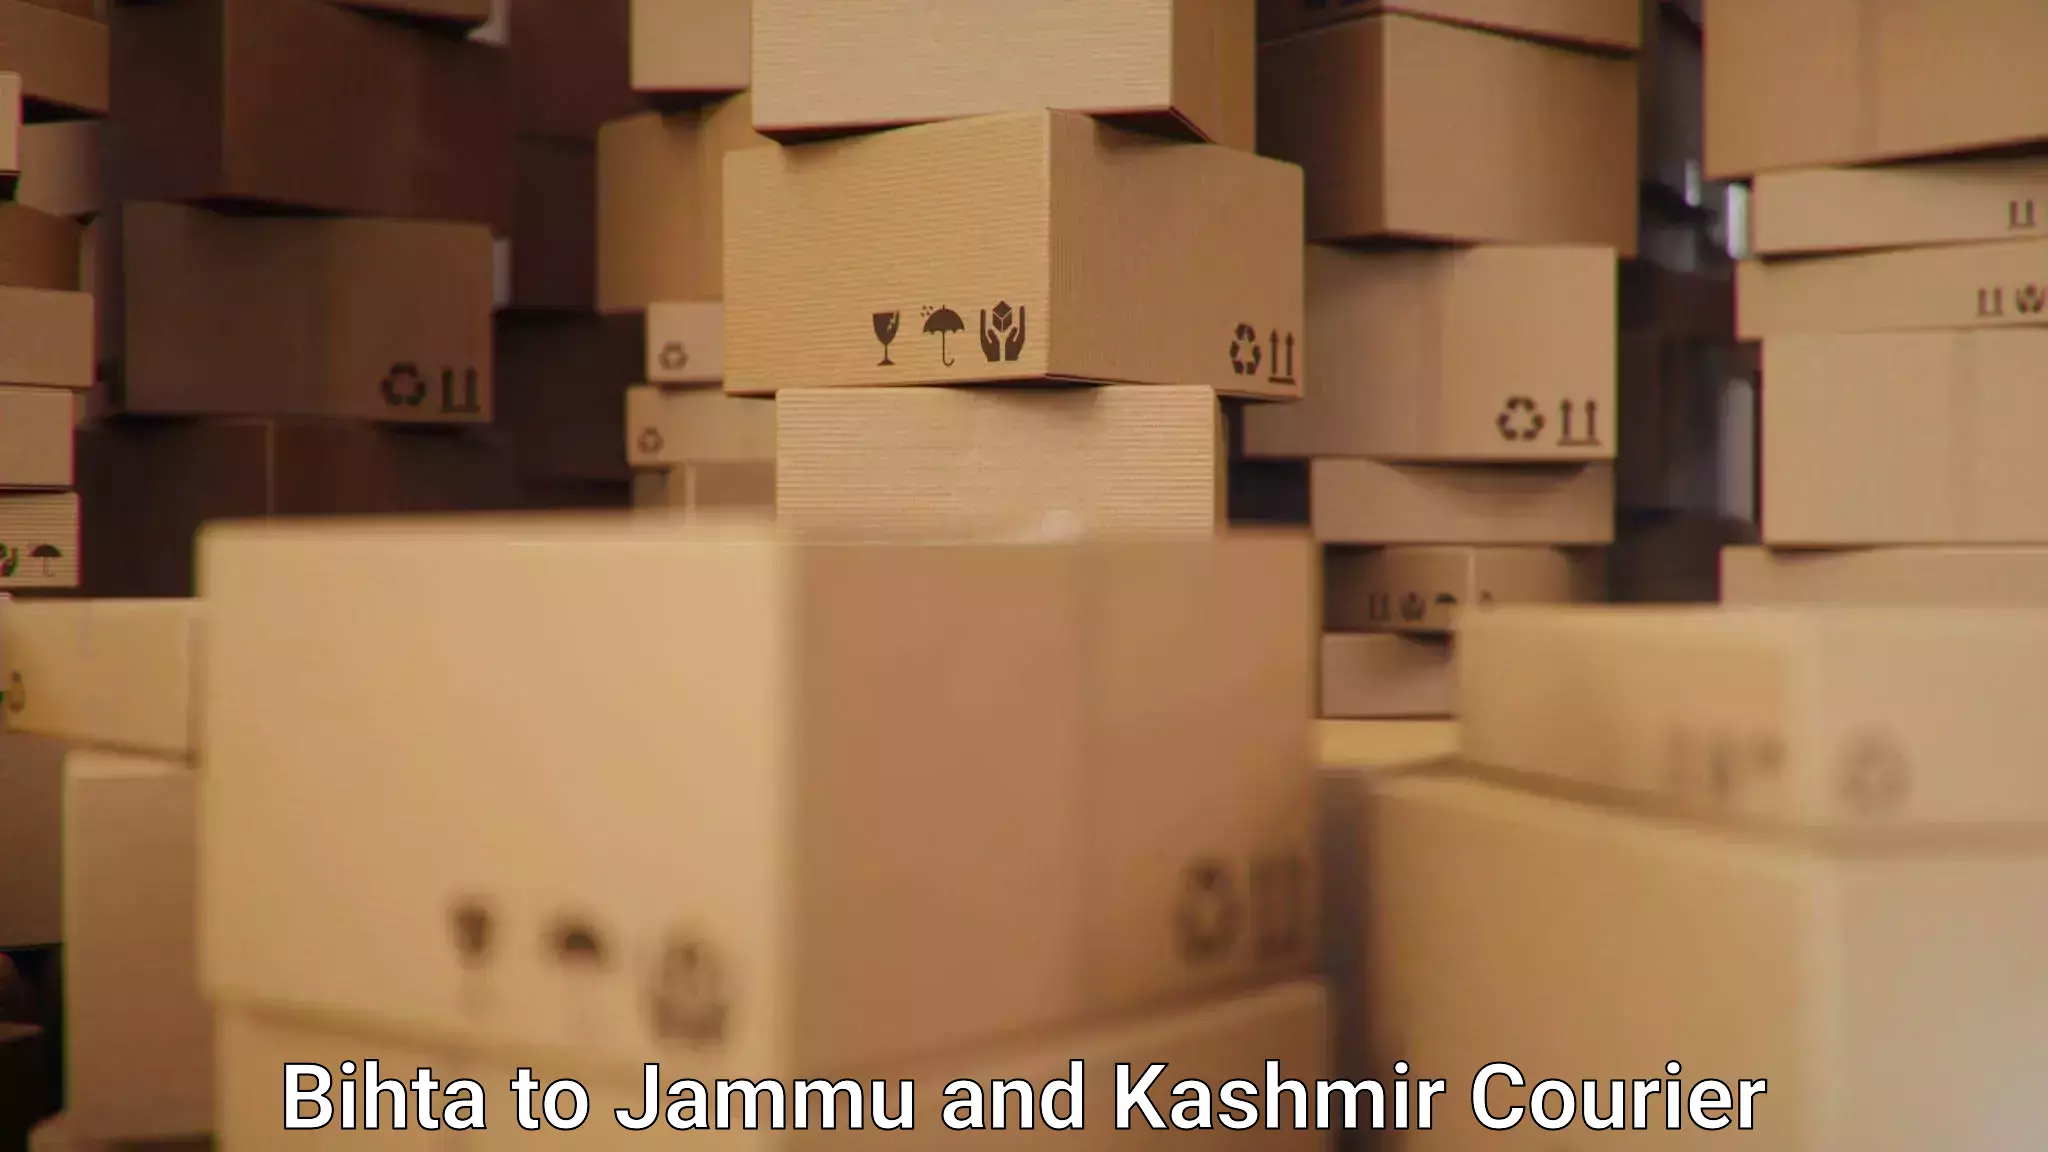 Efficient shipping operations in Bihta to Baramulla